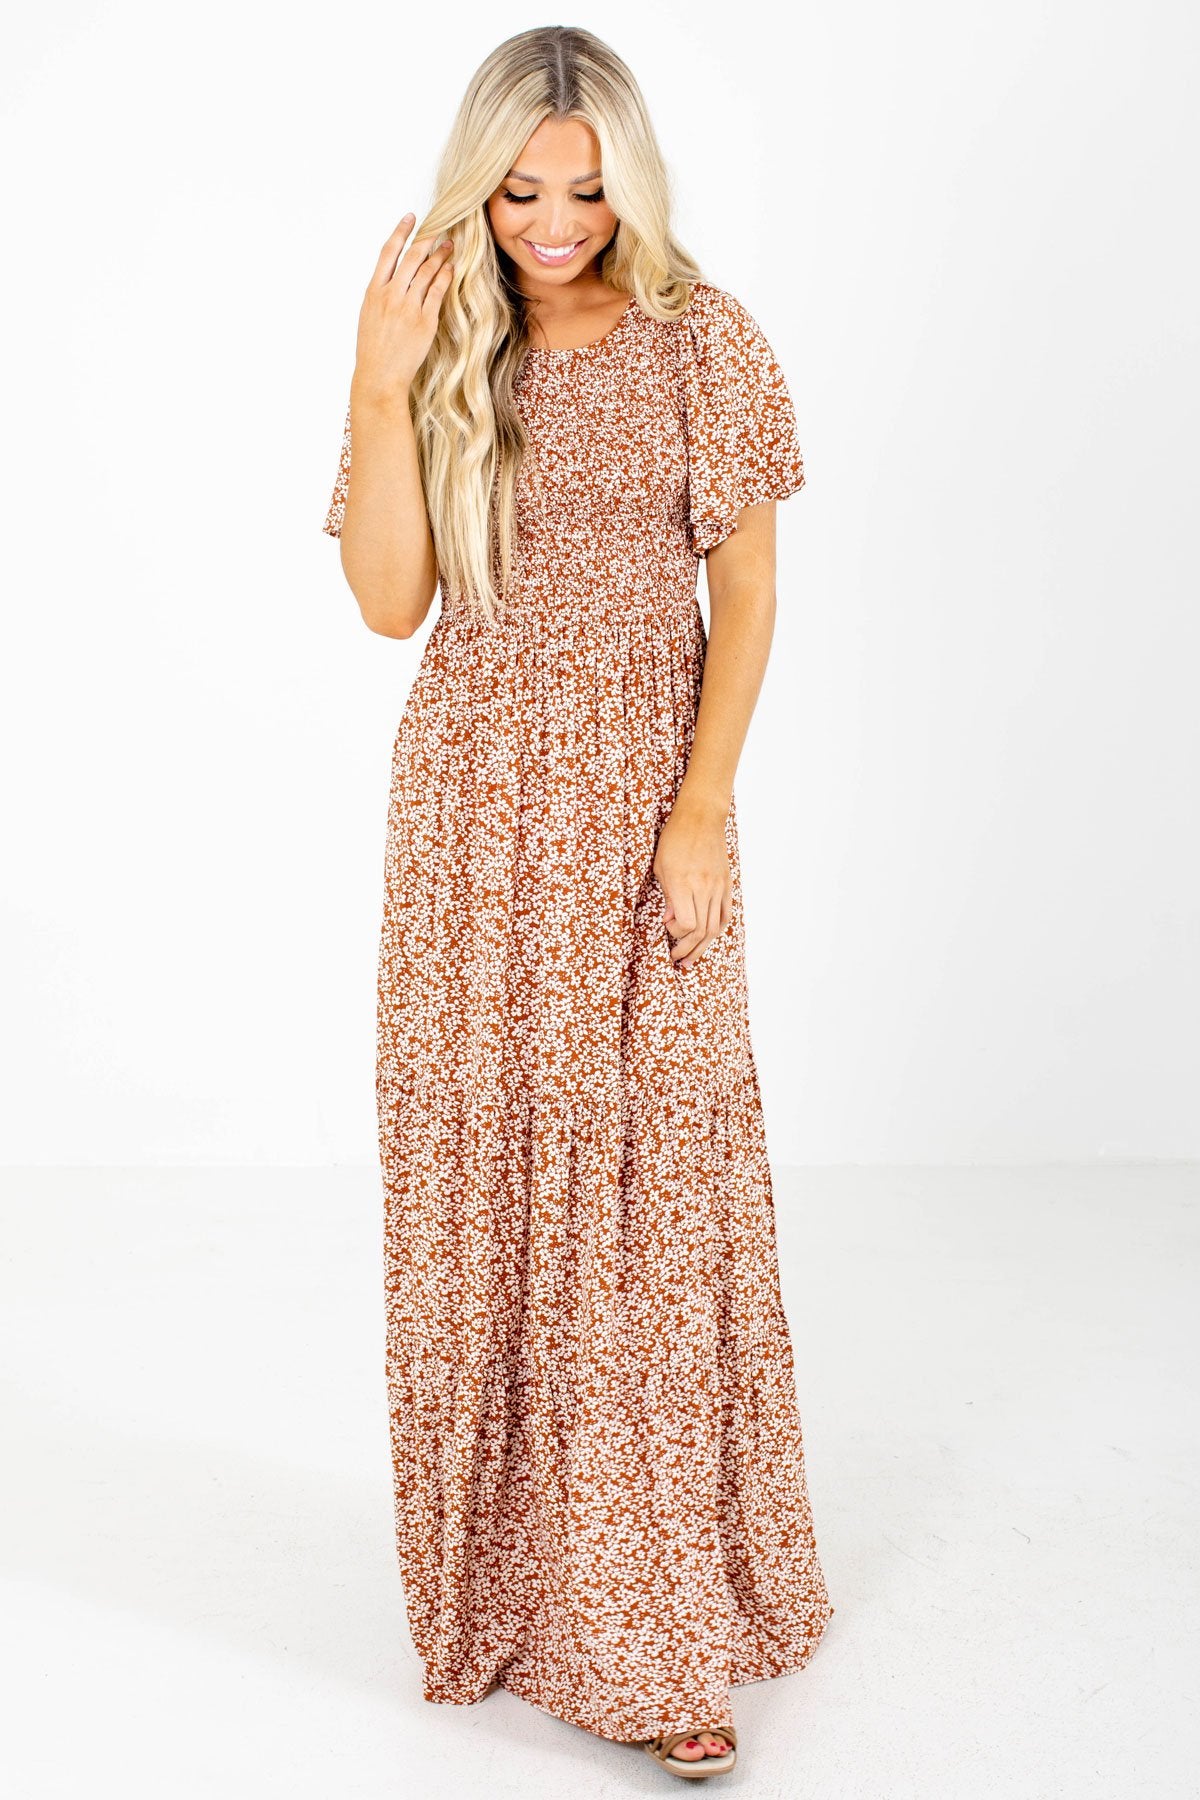 Leave Them Speechless Rust Floral Maxi Dress